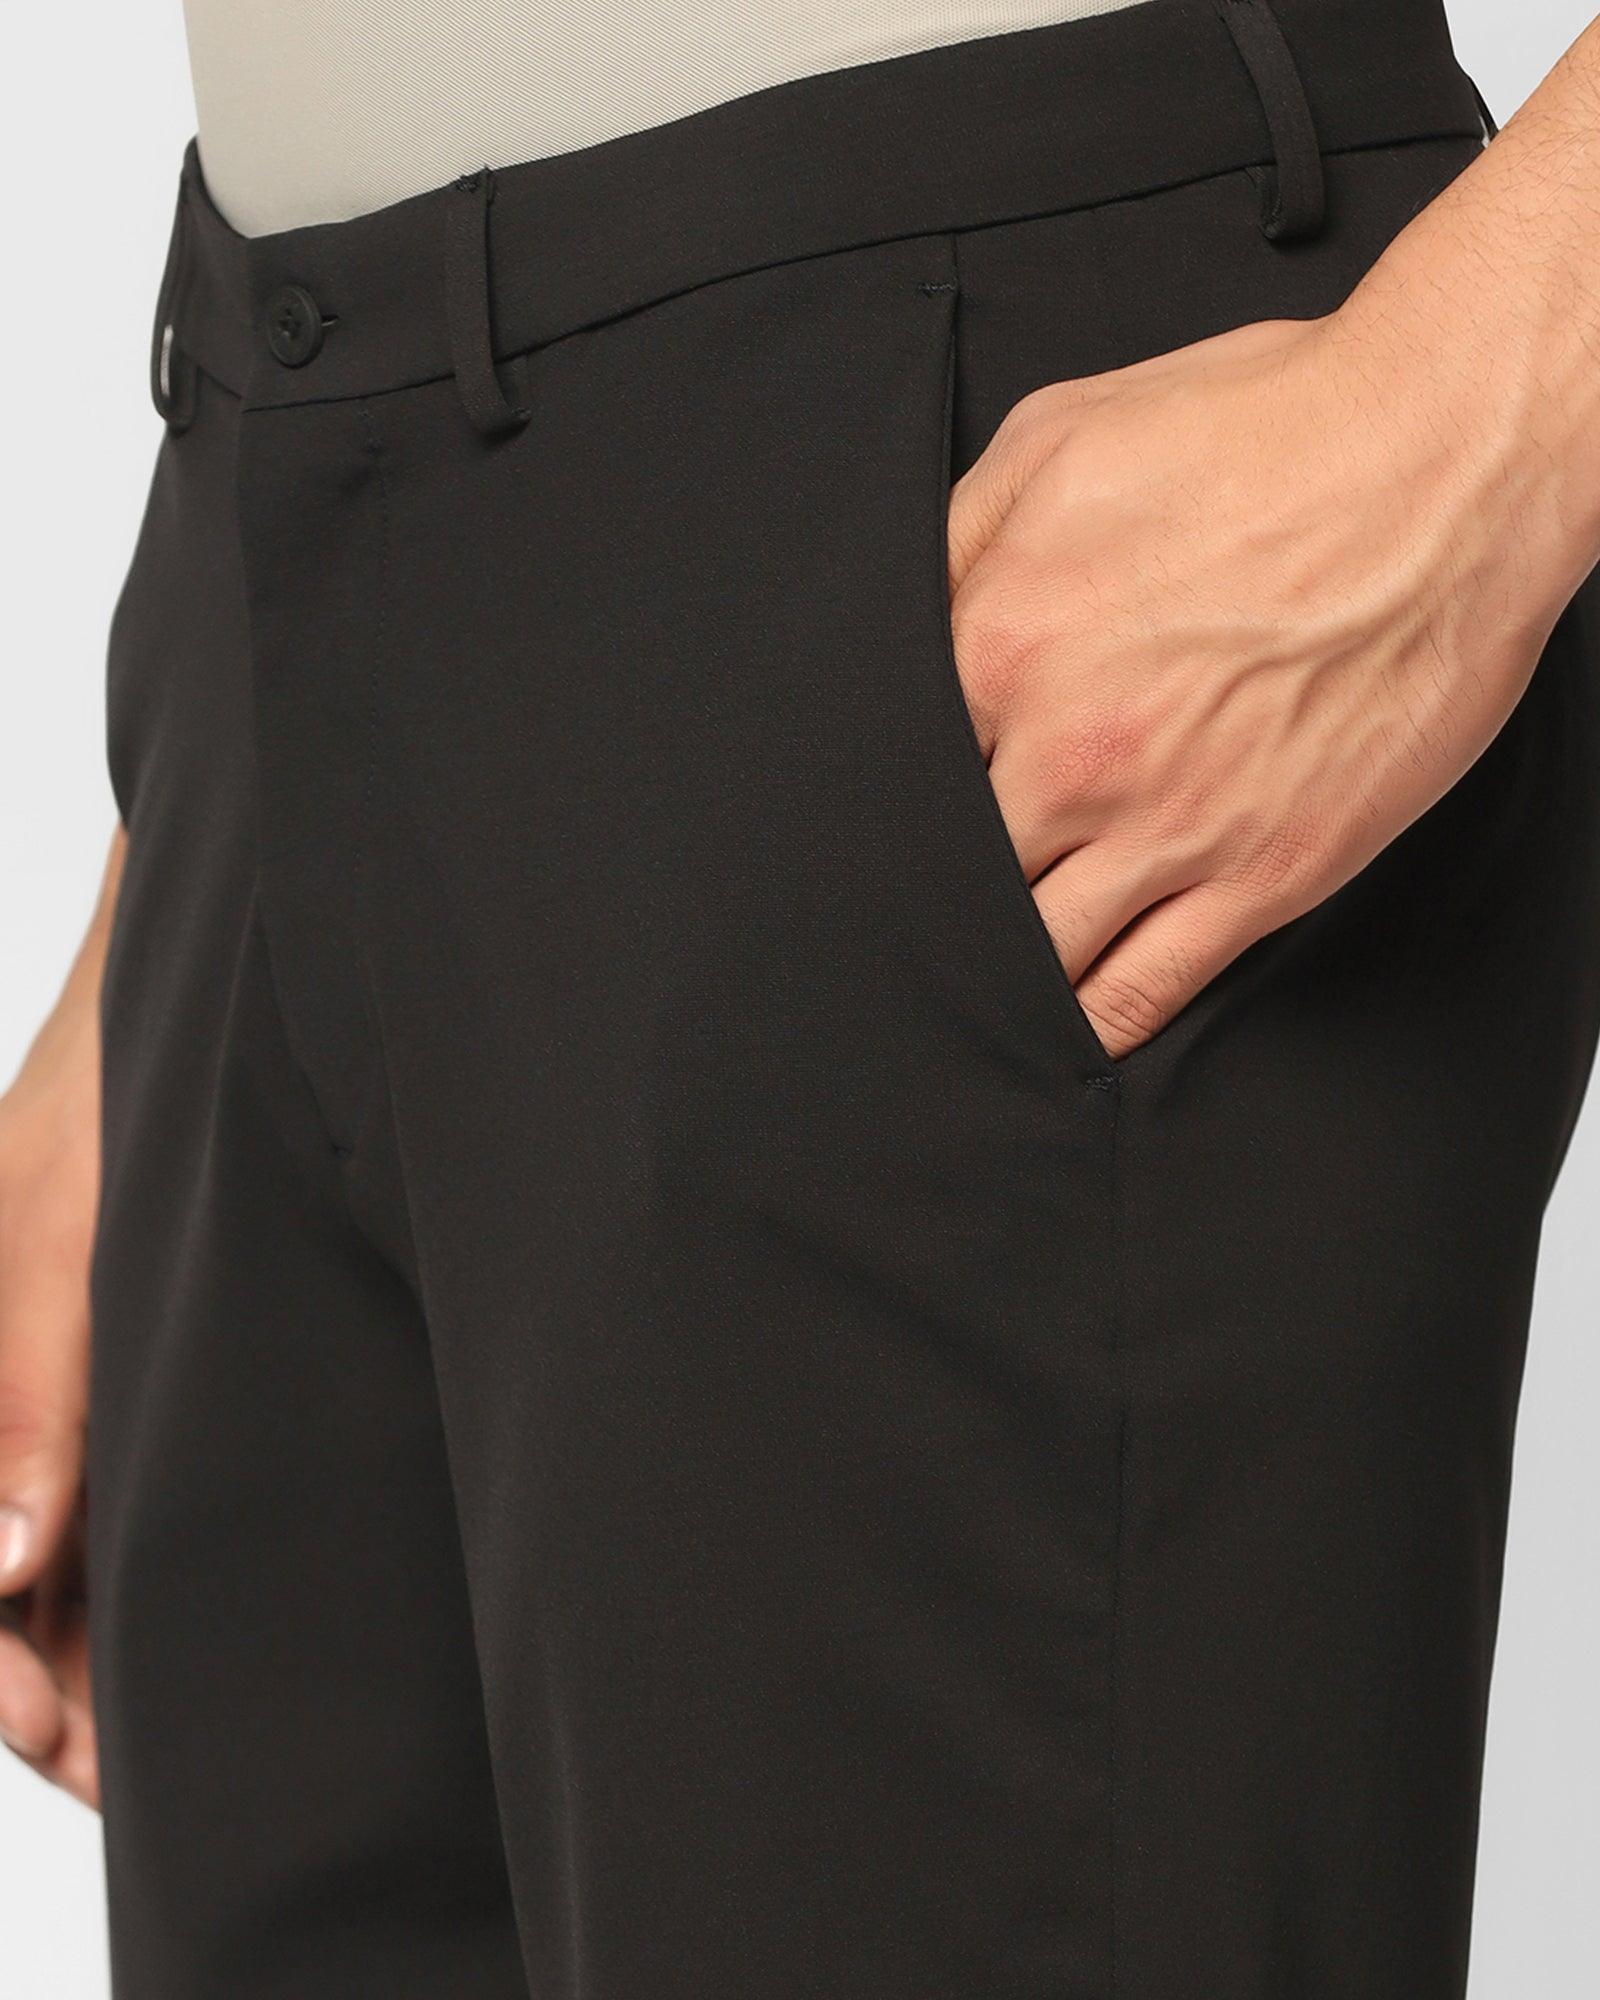 TechPro Casual Black Solid Shorts - Serry